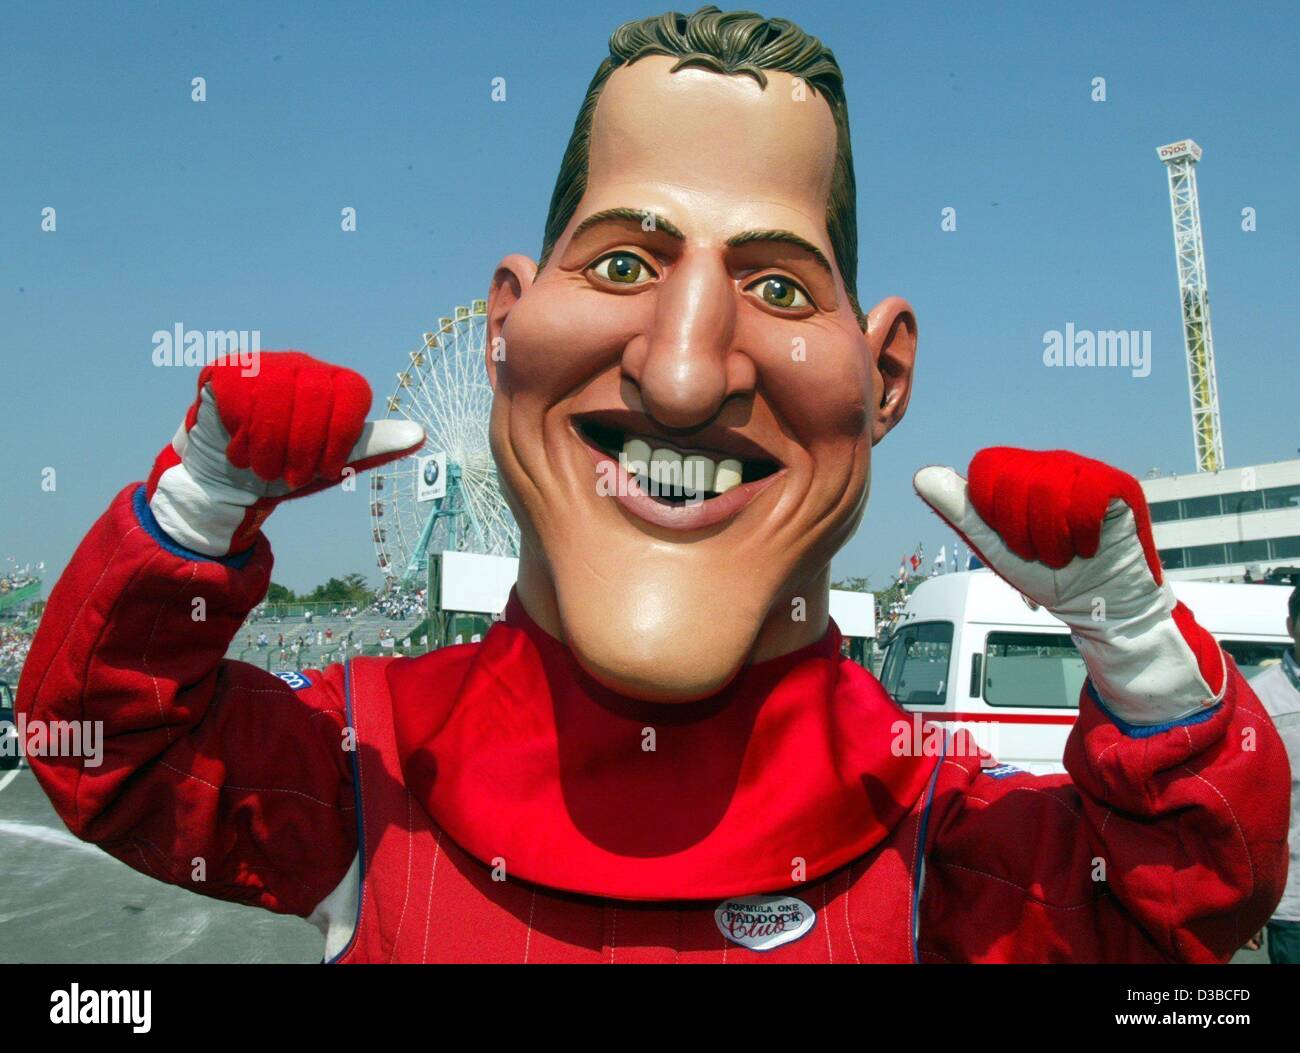 dpa) - A man wears a huge mask with the face of German formula one champion  Michael Schumacher at the racing court in Suzuka, Japan, 13 October 2002.  Michael Schumacher wins the